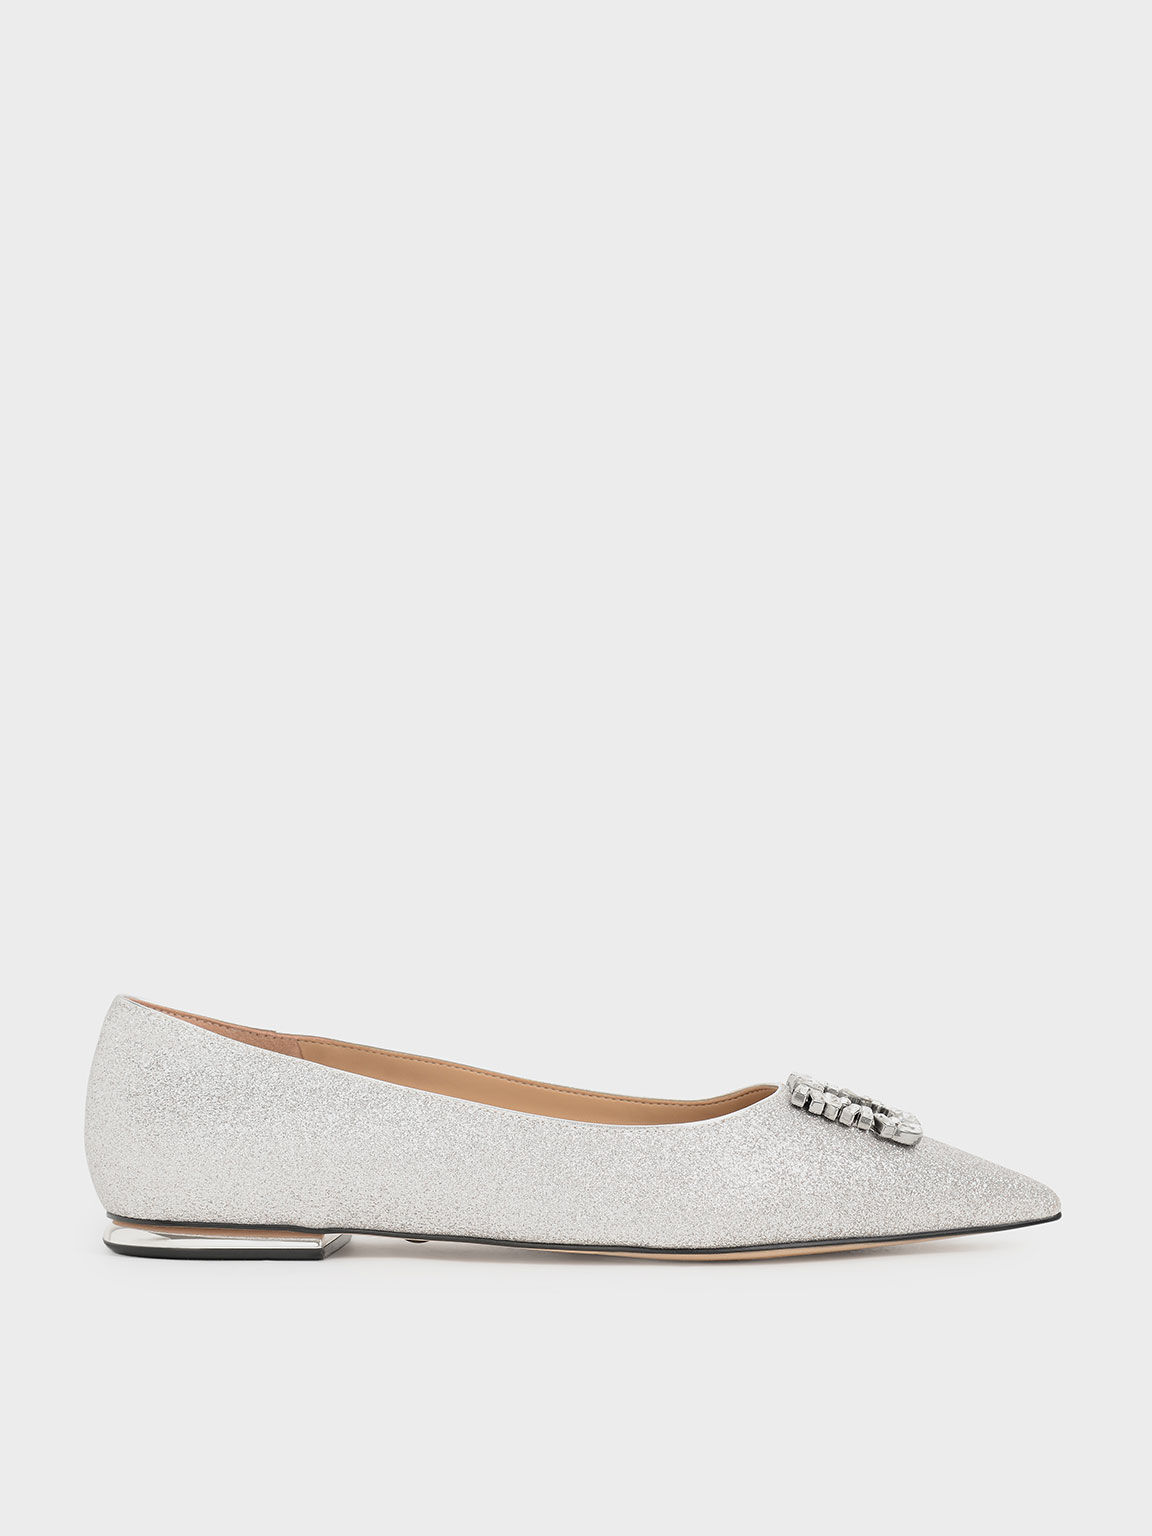 8 best luxury ballet flats to step into the summer with